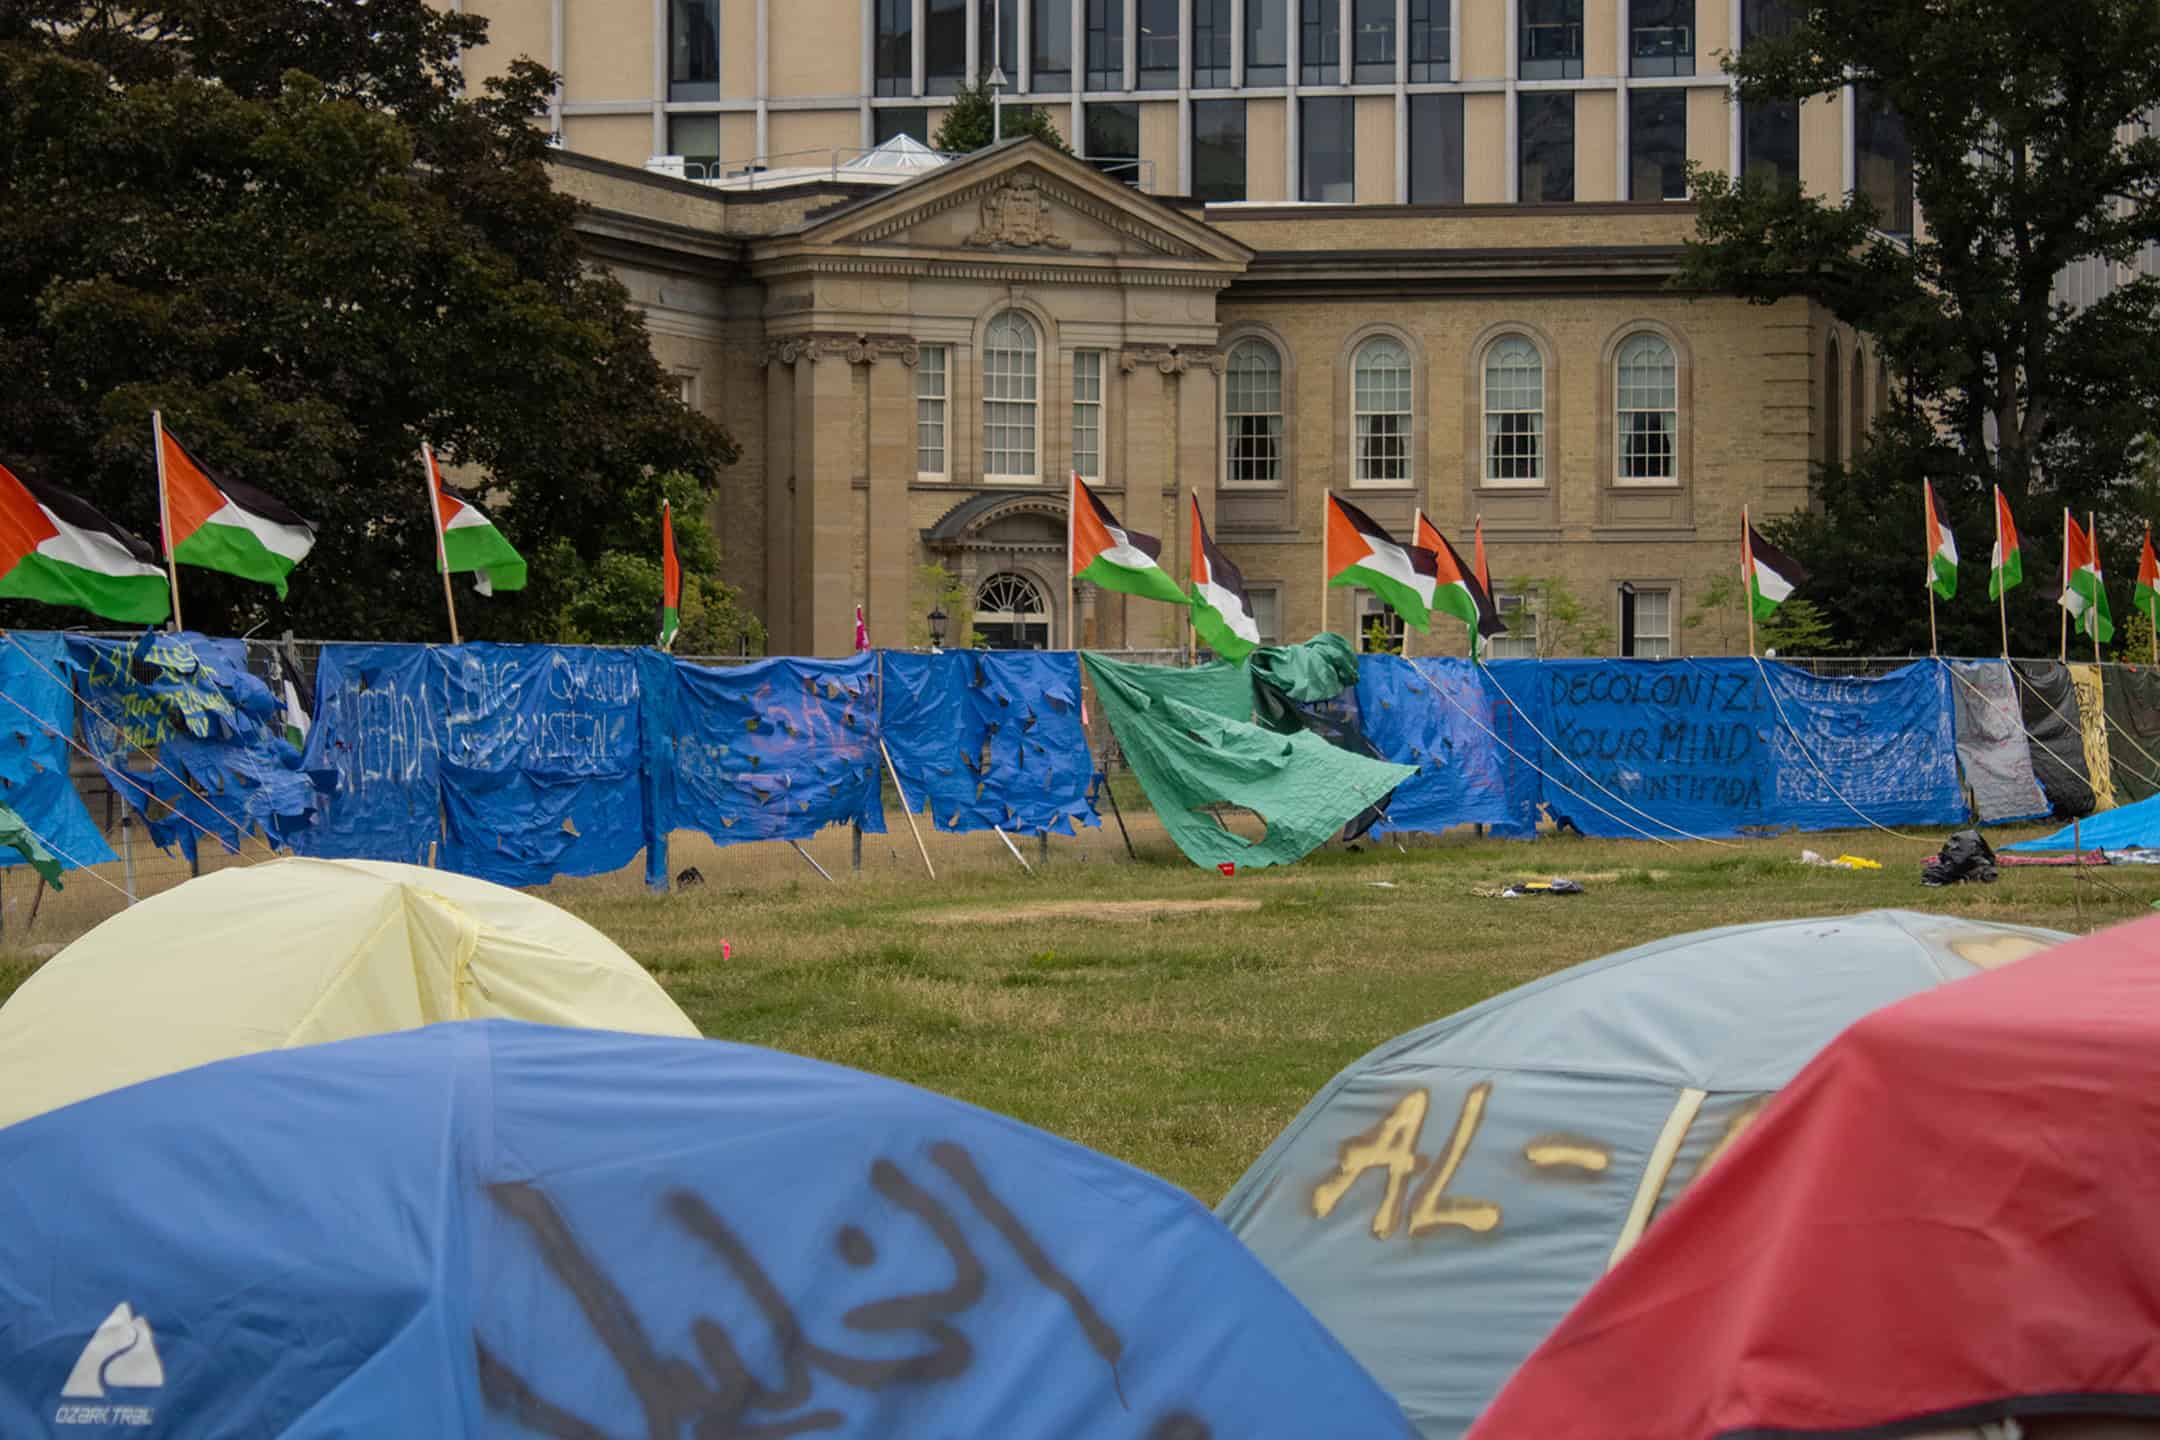 Protesters clear out encampment after securing amnesty. KAISA KASEKAMP/THE VARSITY